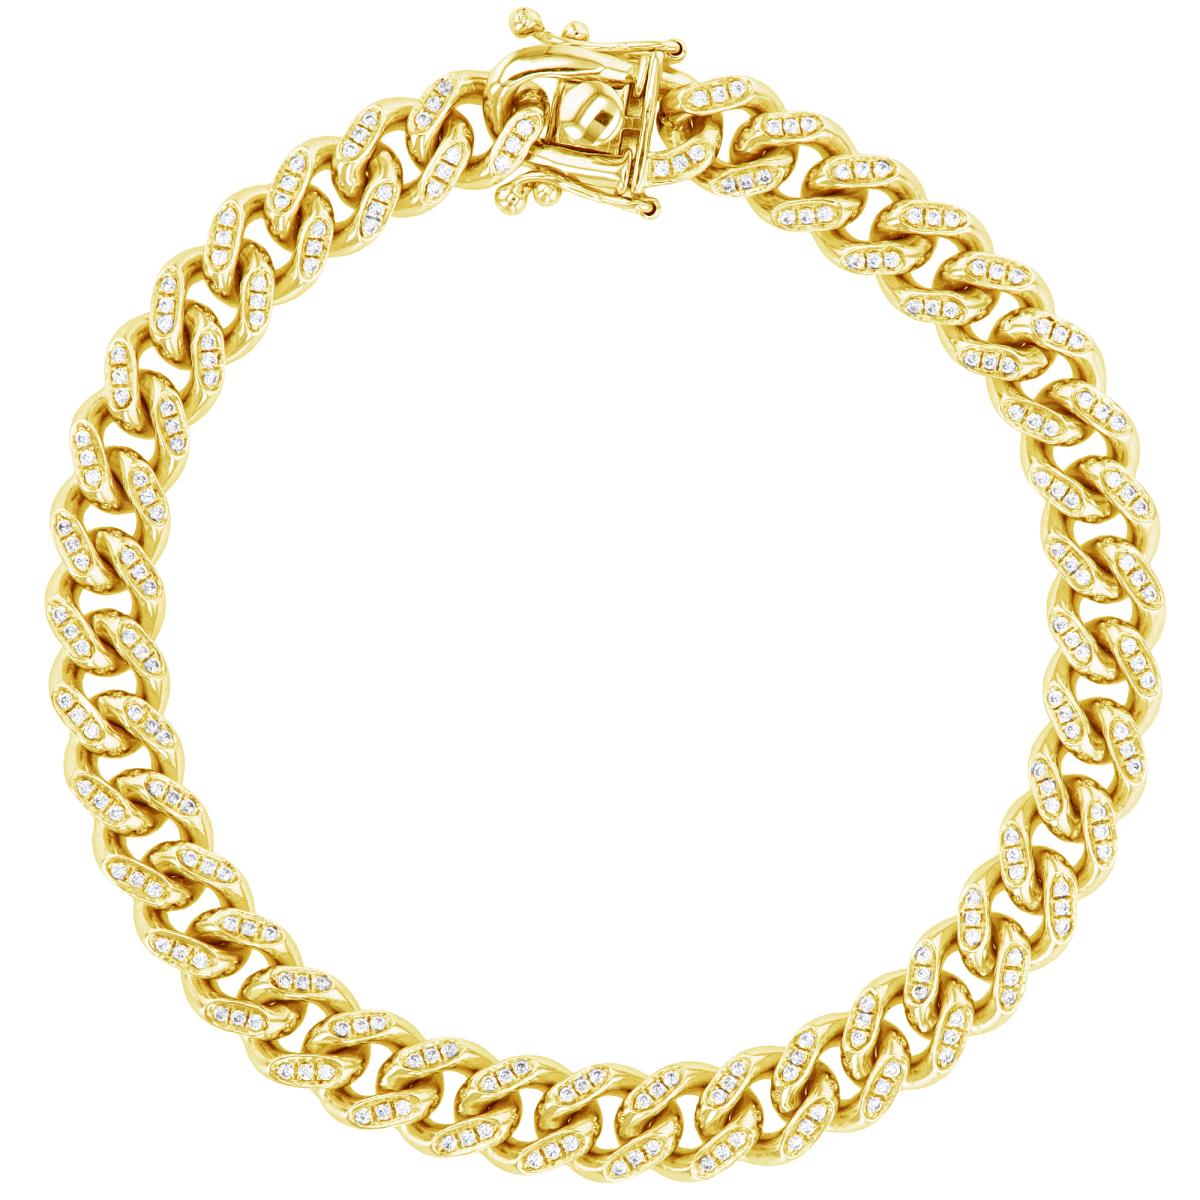 14K Yellow Gold 0.45CTTW Diamonds Pave 4.5mm Solid Miami Cuban 120 8.5" Chain Bracelet With Box Lock